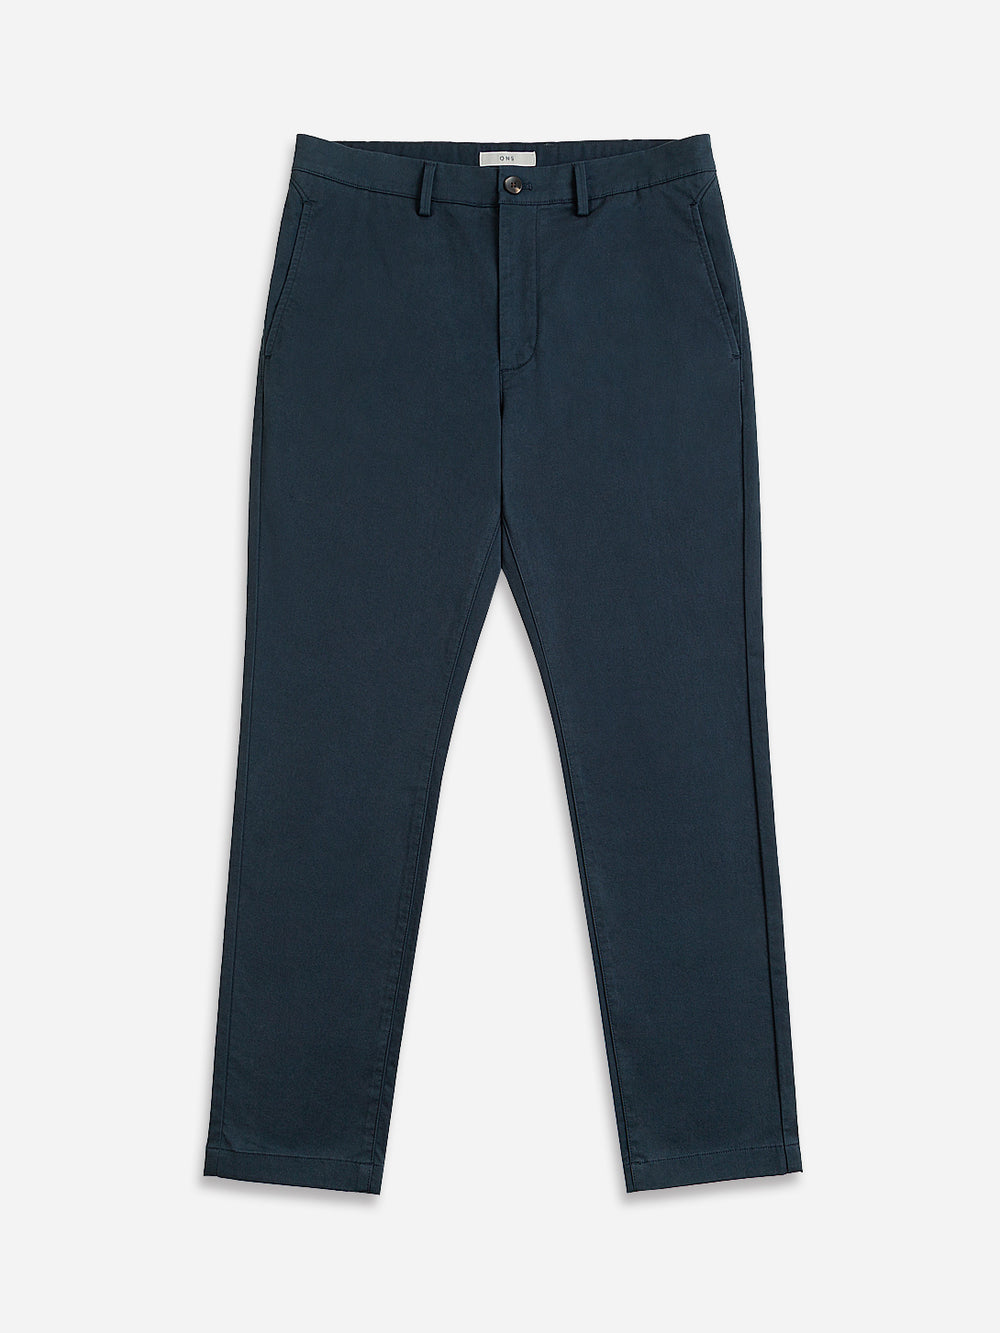 Chinos - Men's Chinos : Shop Chinos online | O.N.S